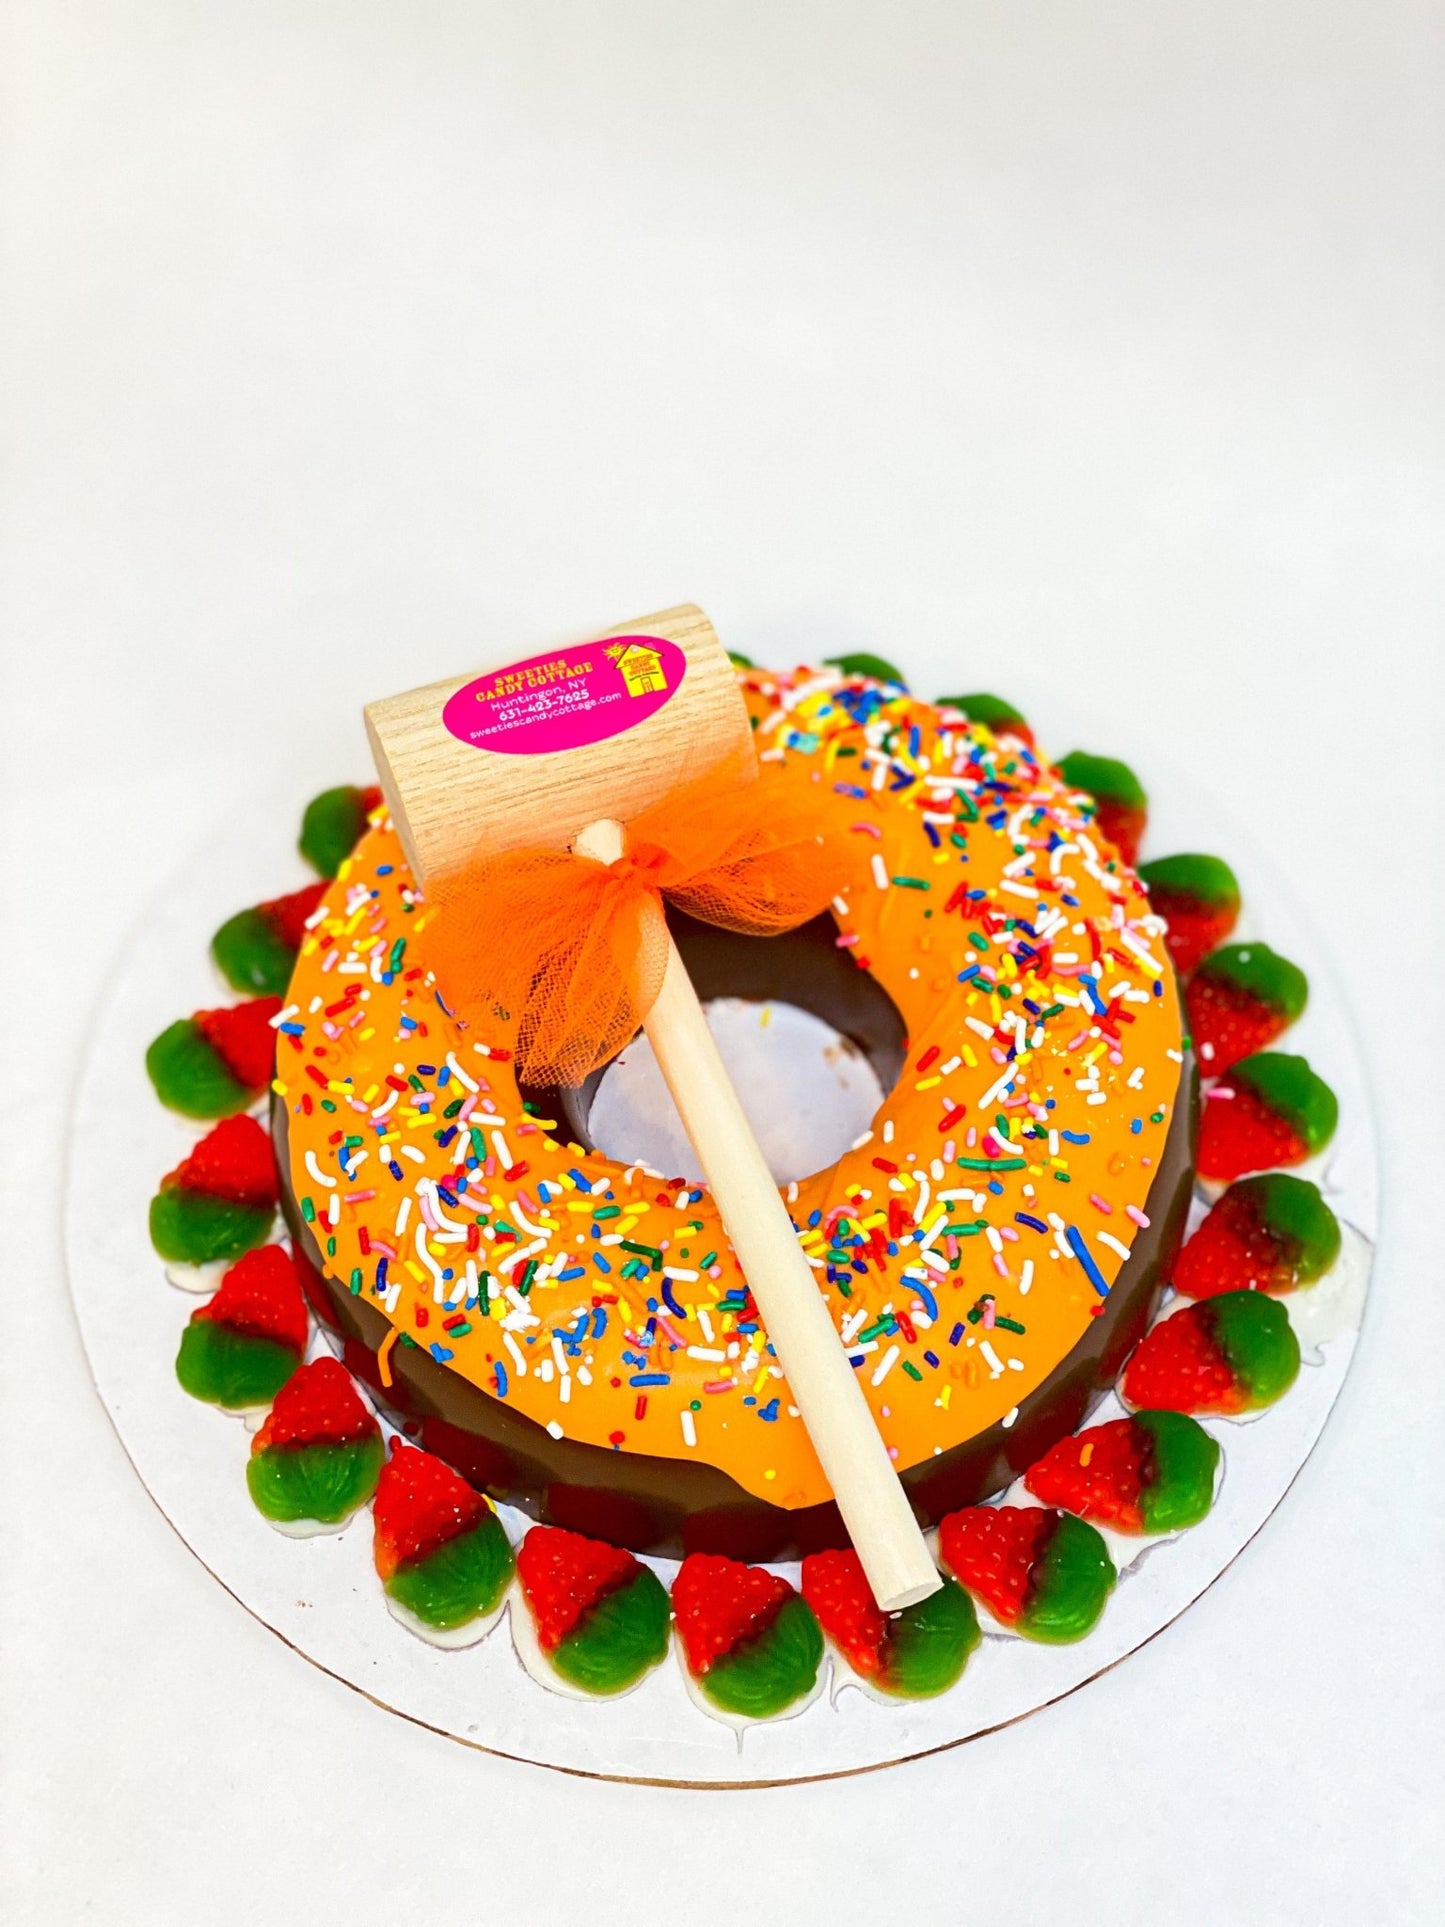 Smash Donut!candy giftMake your gift a Smash Hit with our Smash Donuts! A chocolate shell filled with a variety of gummy candies.
Same Day Delivery Available